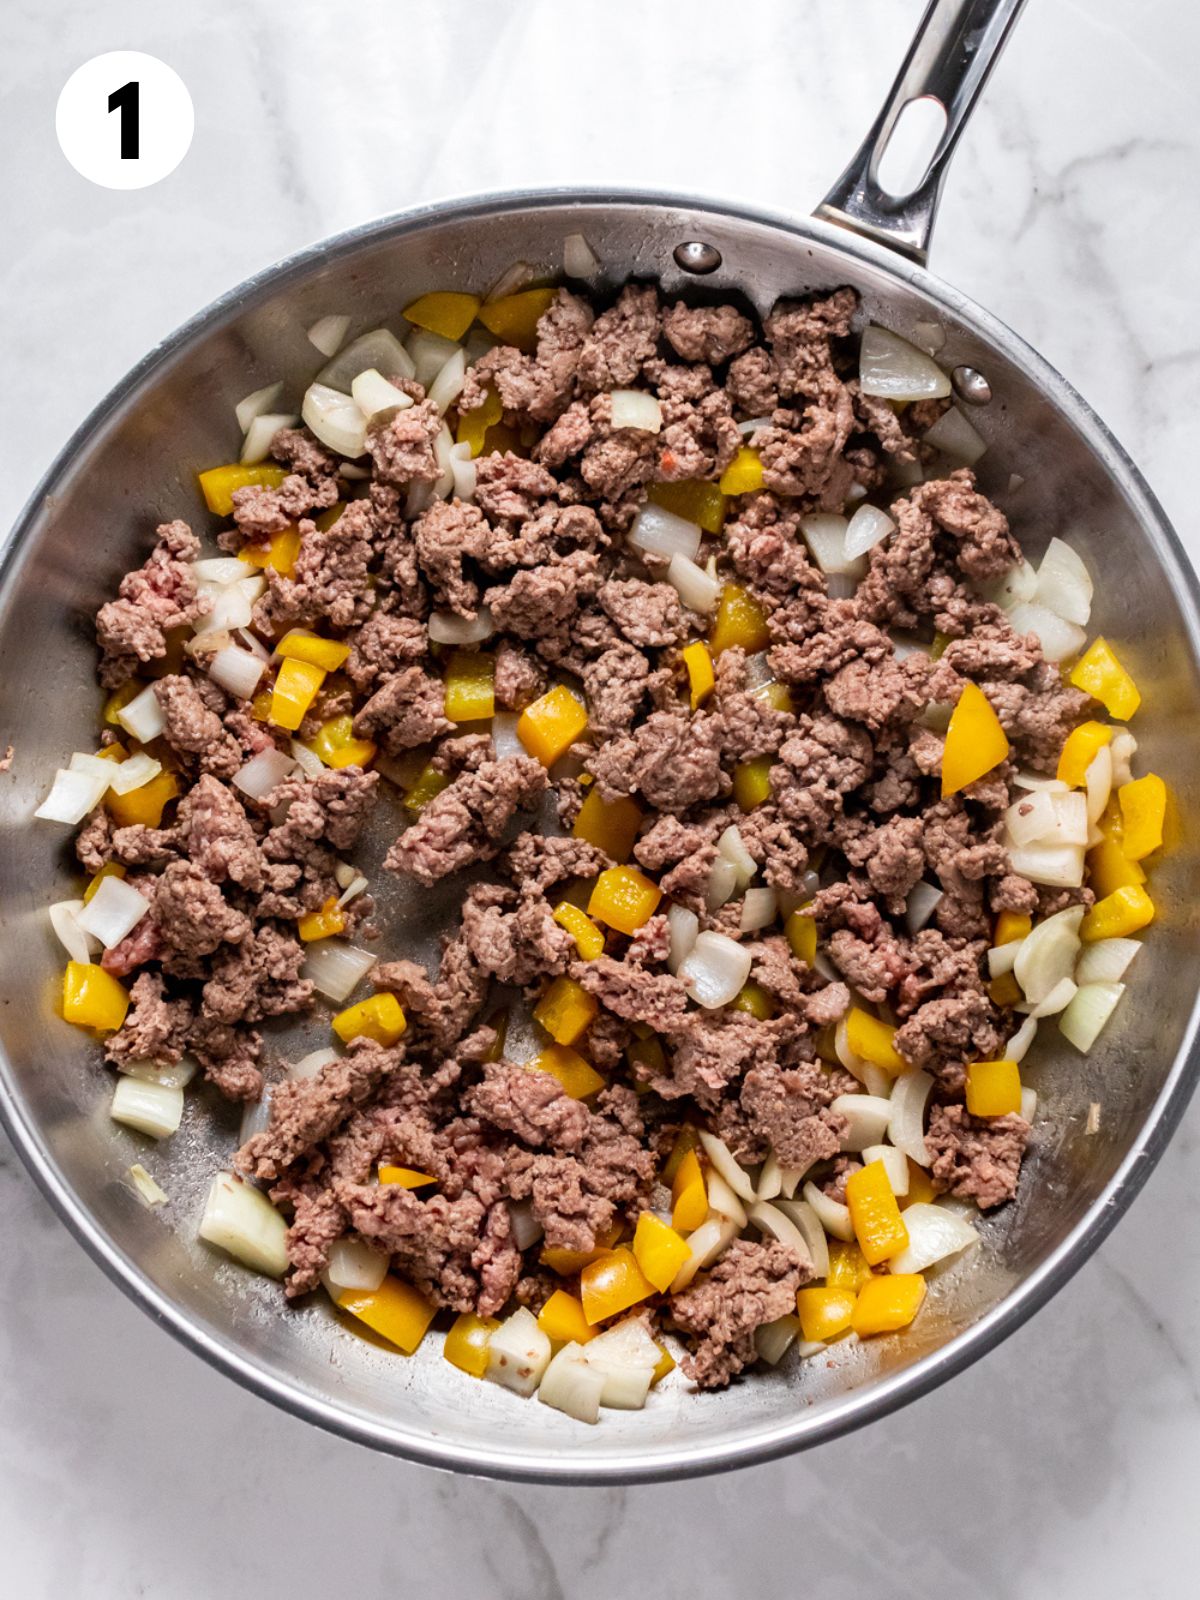 Ground beef, onions, and bell pepper cooked in a skillet.